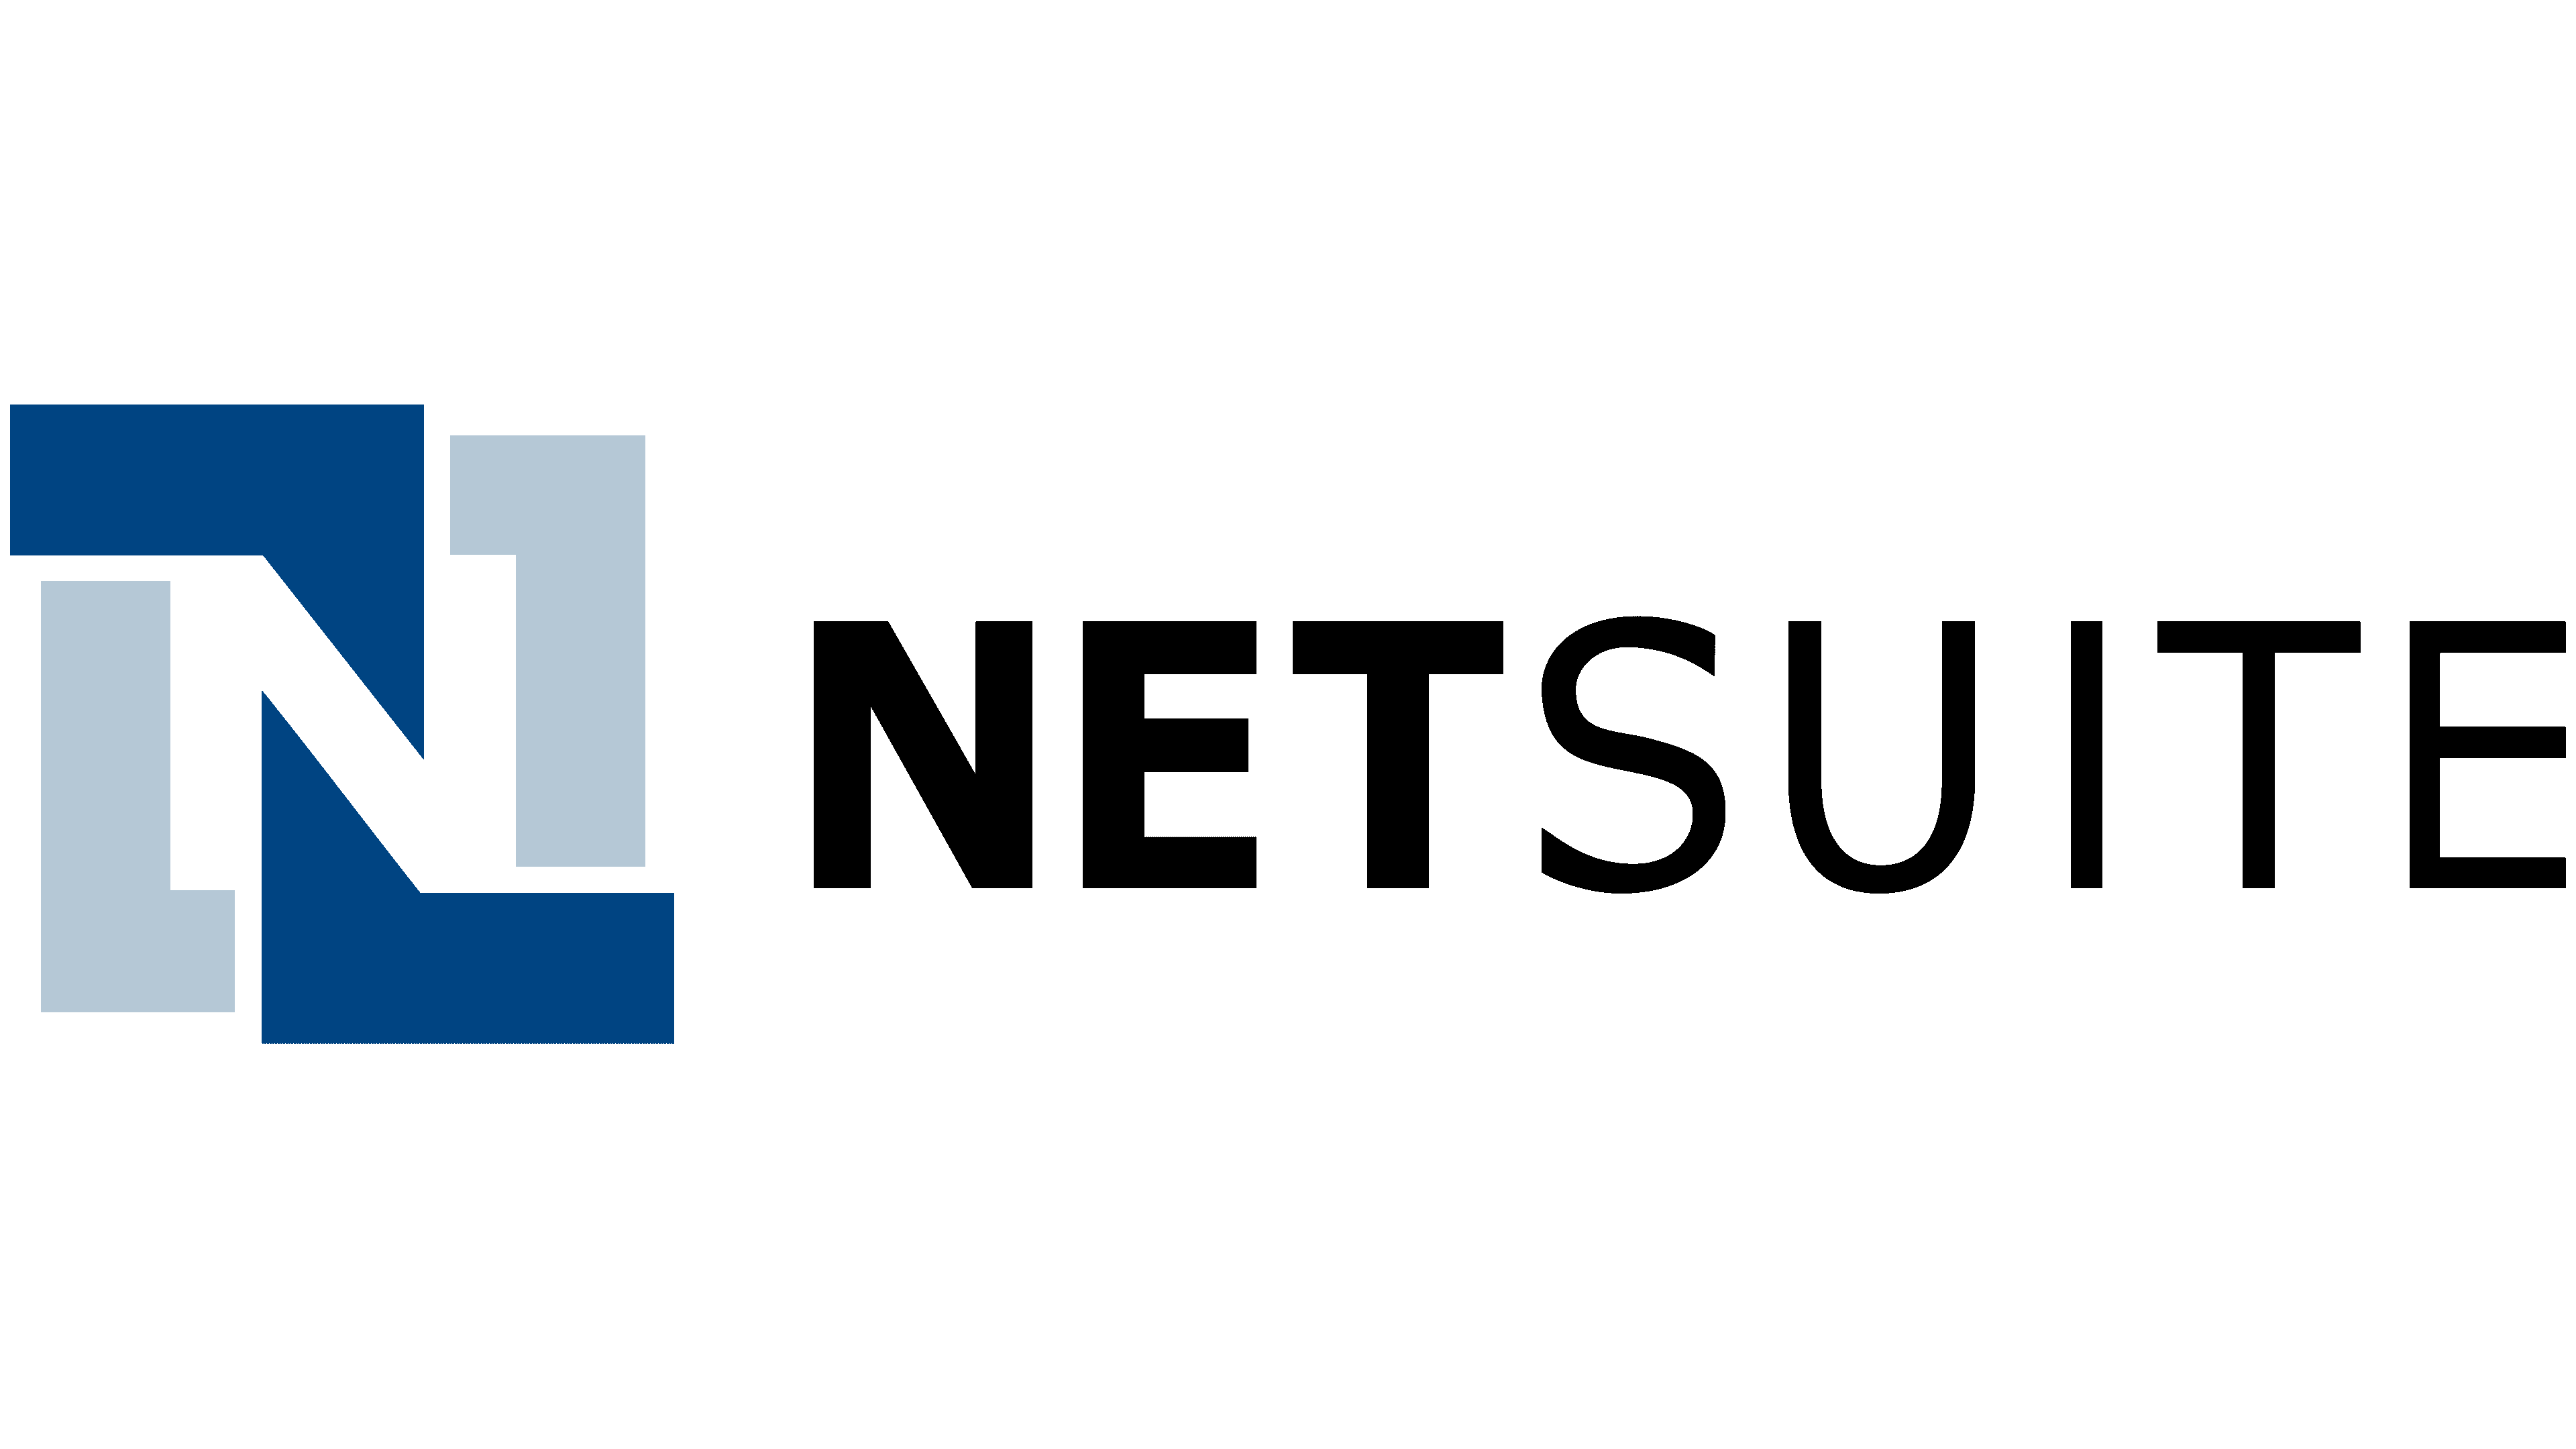 Paramount Consulting offers NetSuite Accounting Software setup and training for businesses of all sizes.